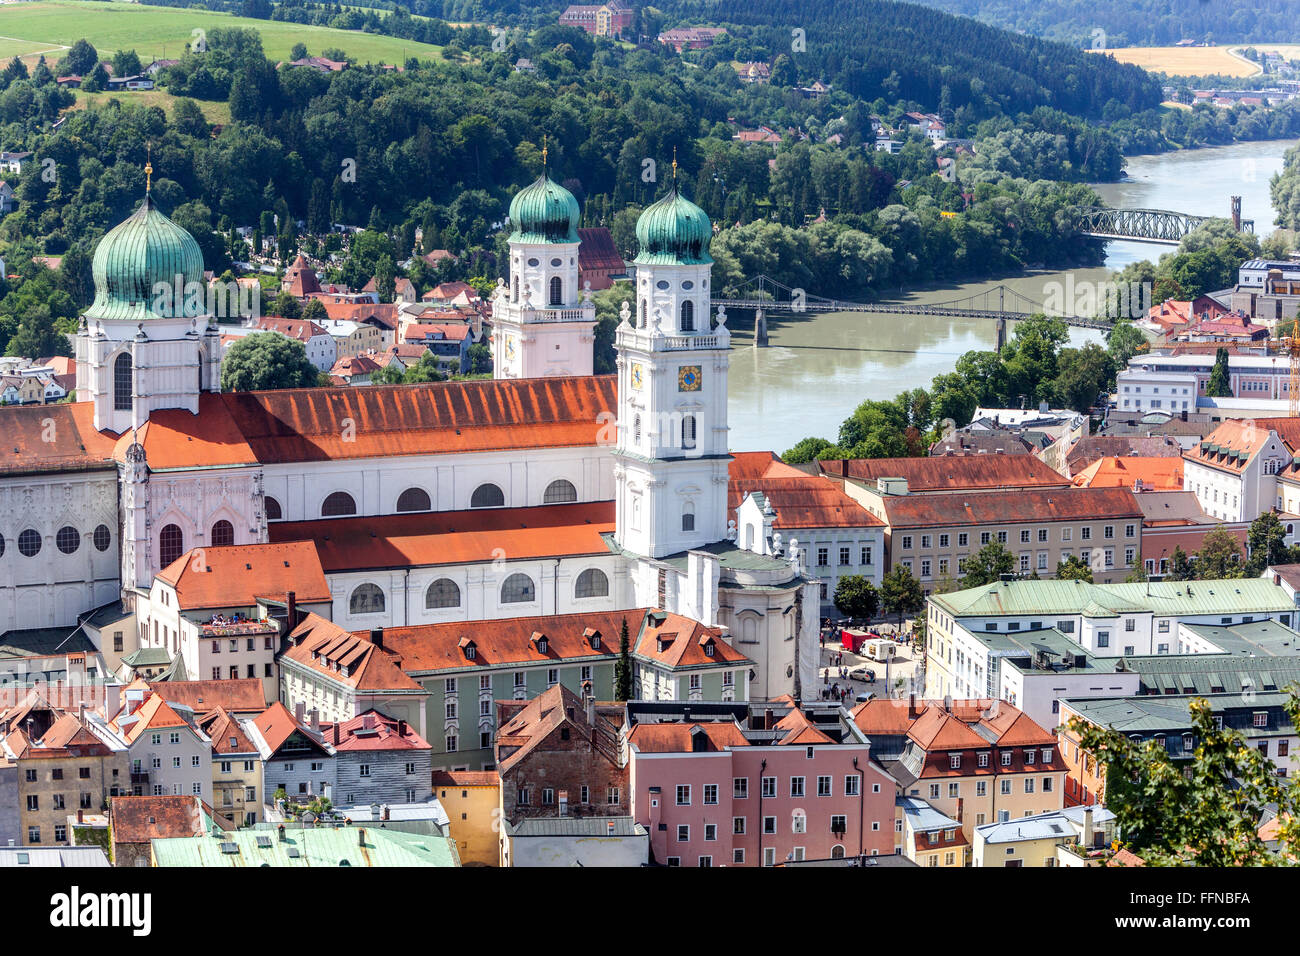 St Stephan Cathedral Passau Germany Old Town Aerial view, River Inn, Lower Bavaria, Europe Stock Photo